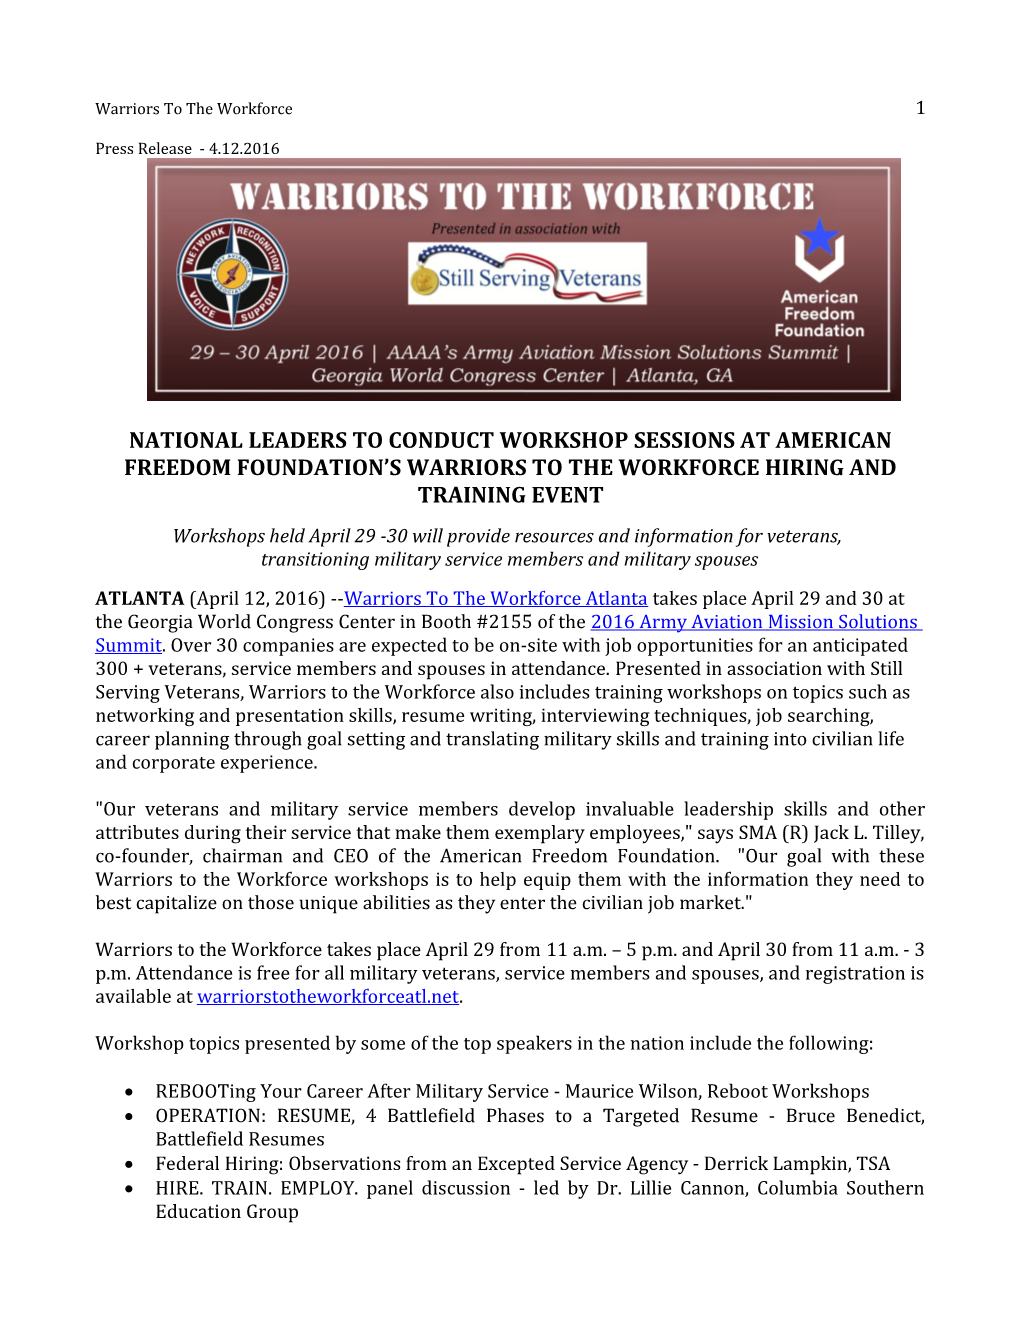 Warriors to the Workforce 1